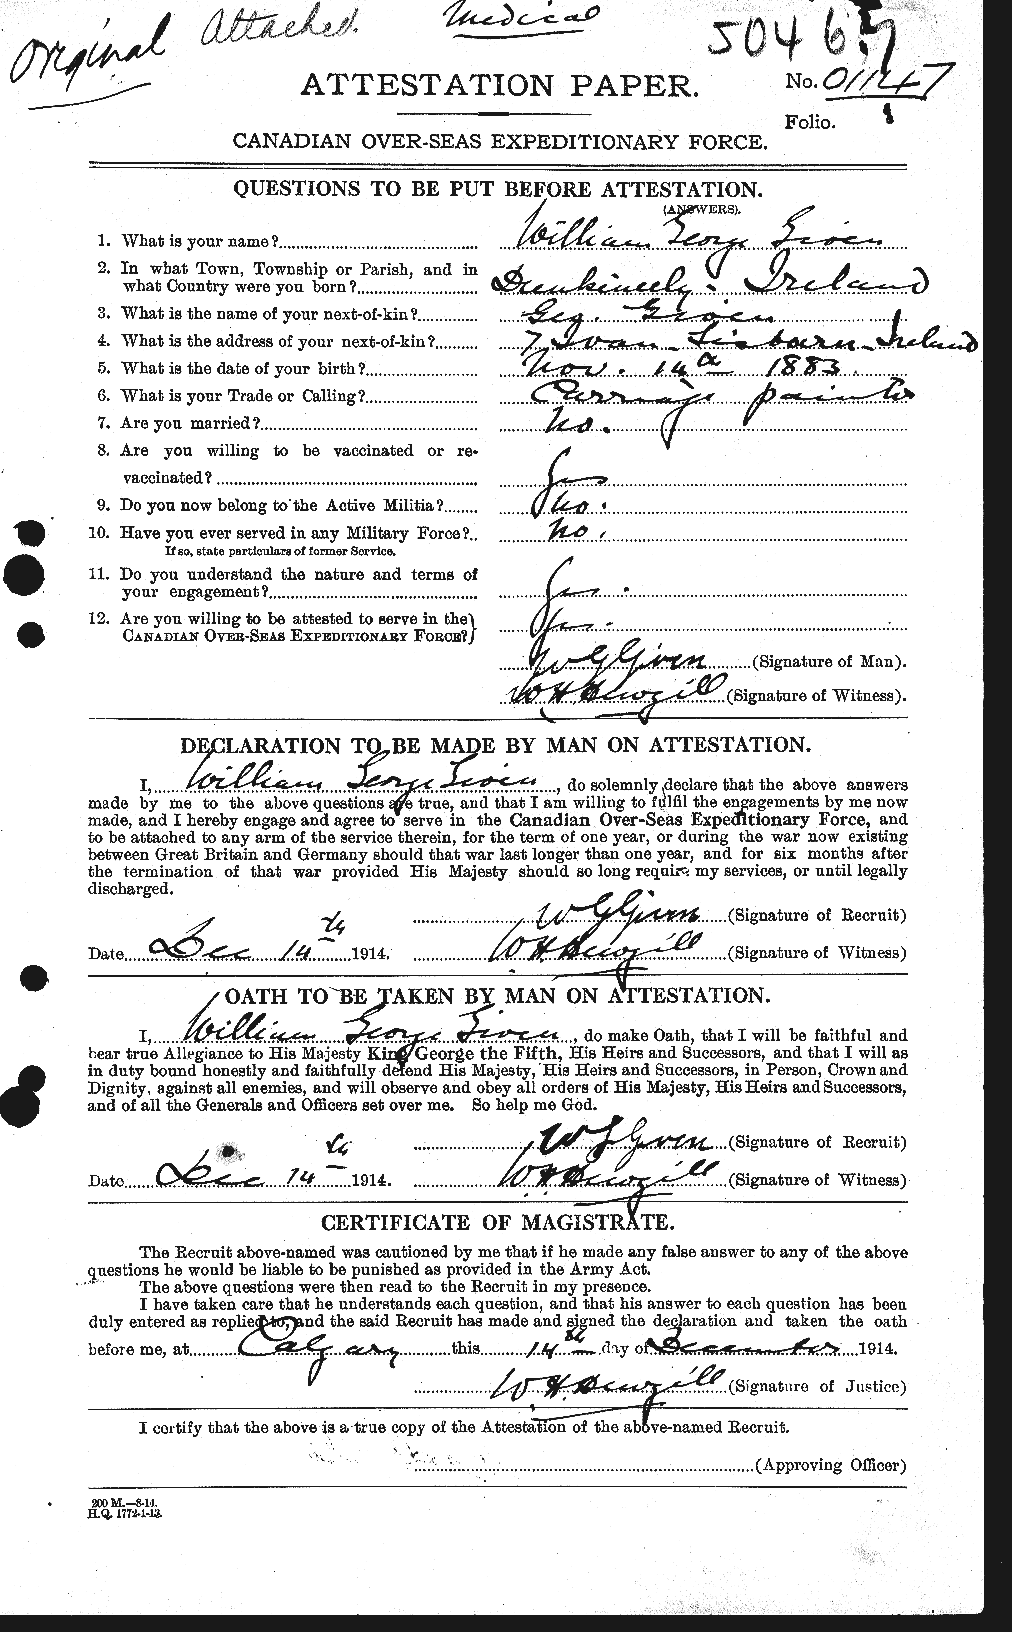 Personnel Records of the First World War - CEF 351430a